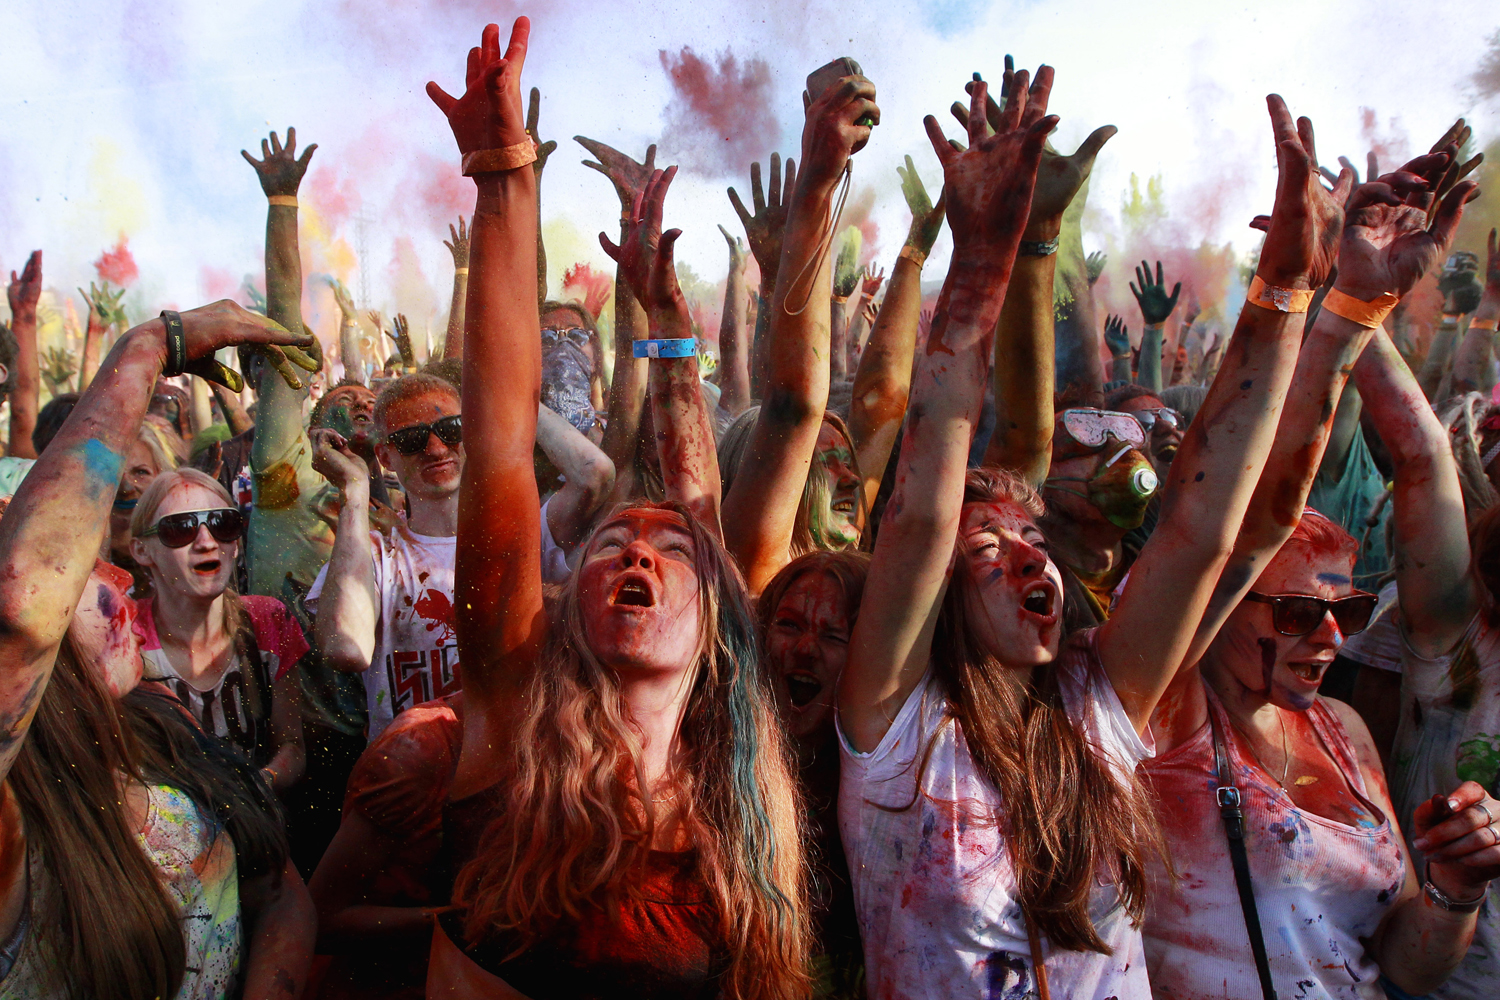 July 13, 2013. Young people throw colored powders at each other during the 'Festival of Colors' in St. Petersburg, Russia.